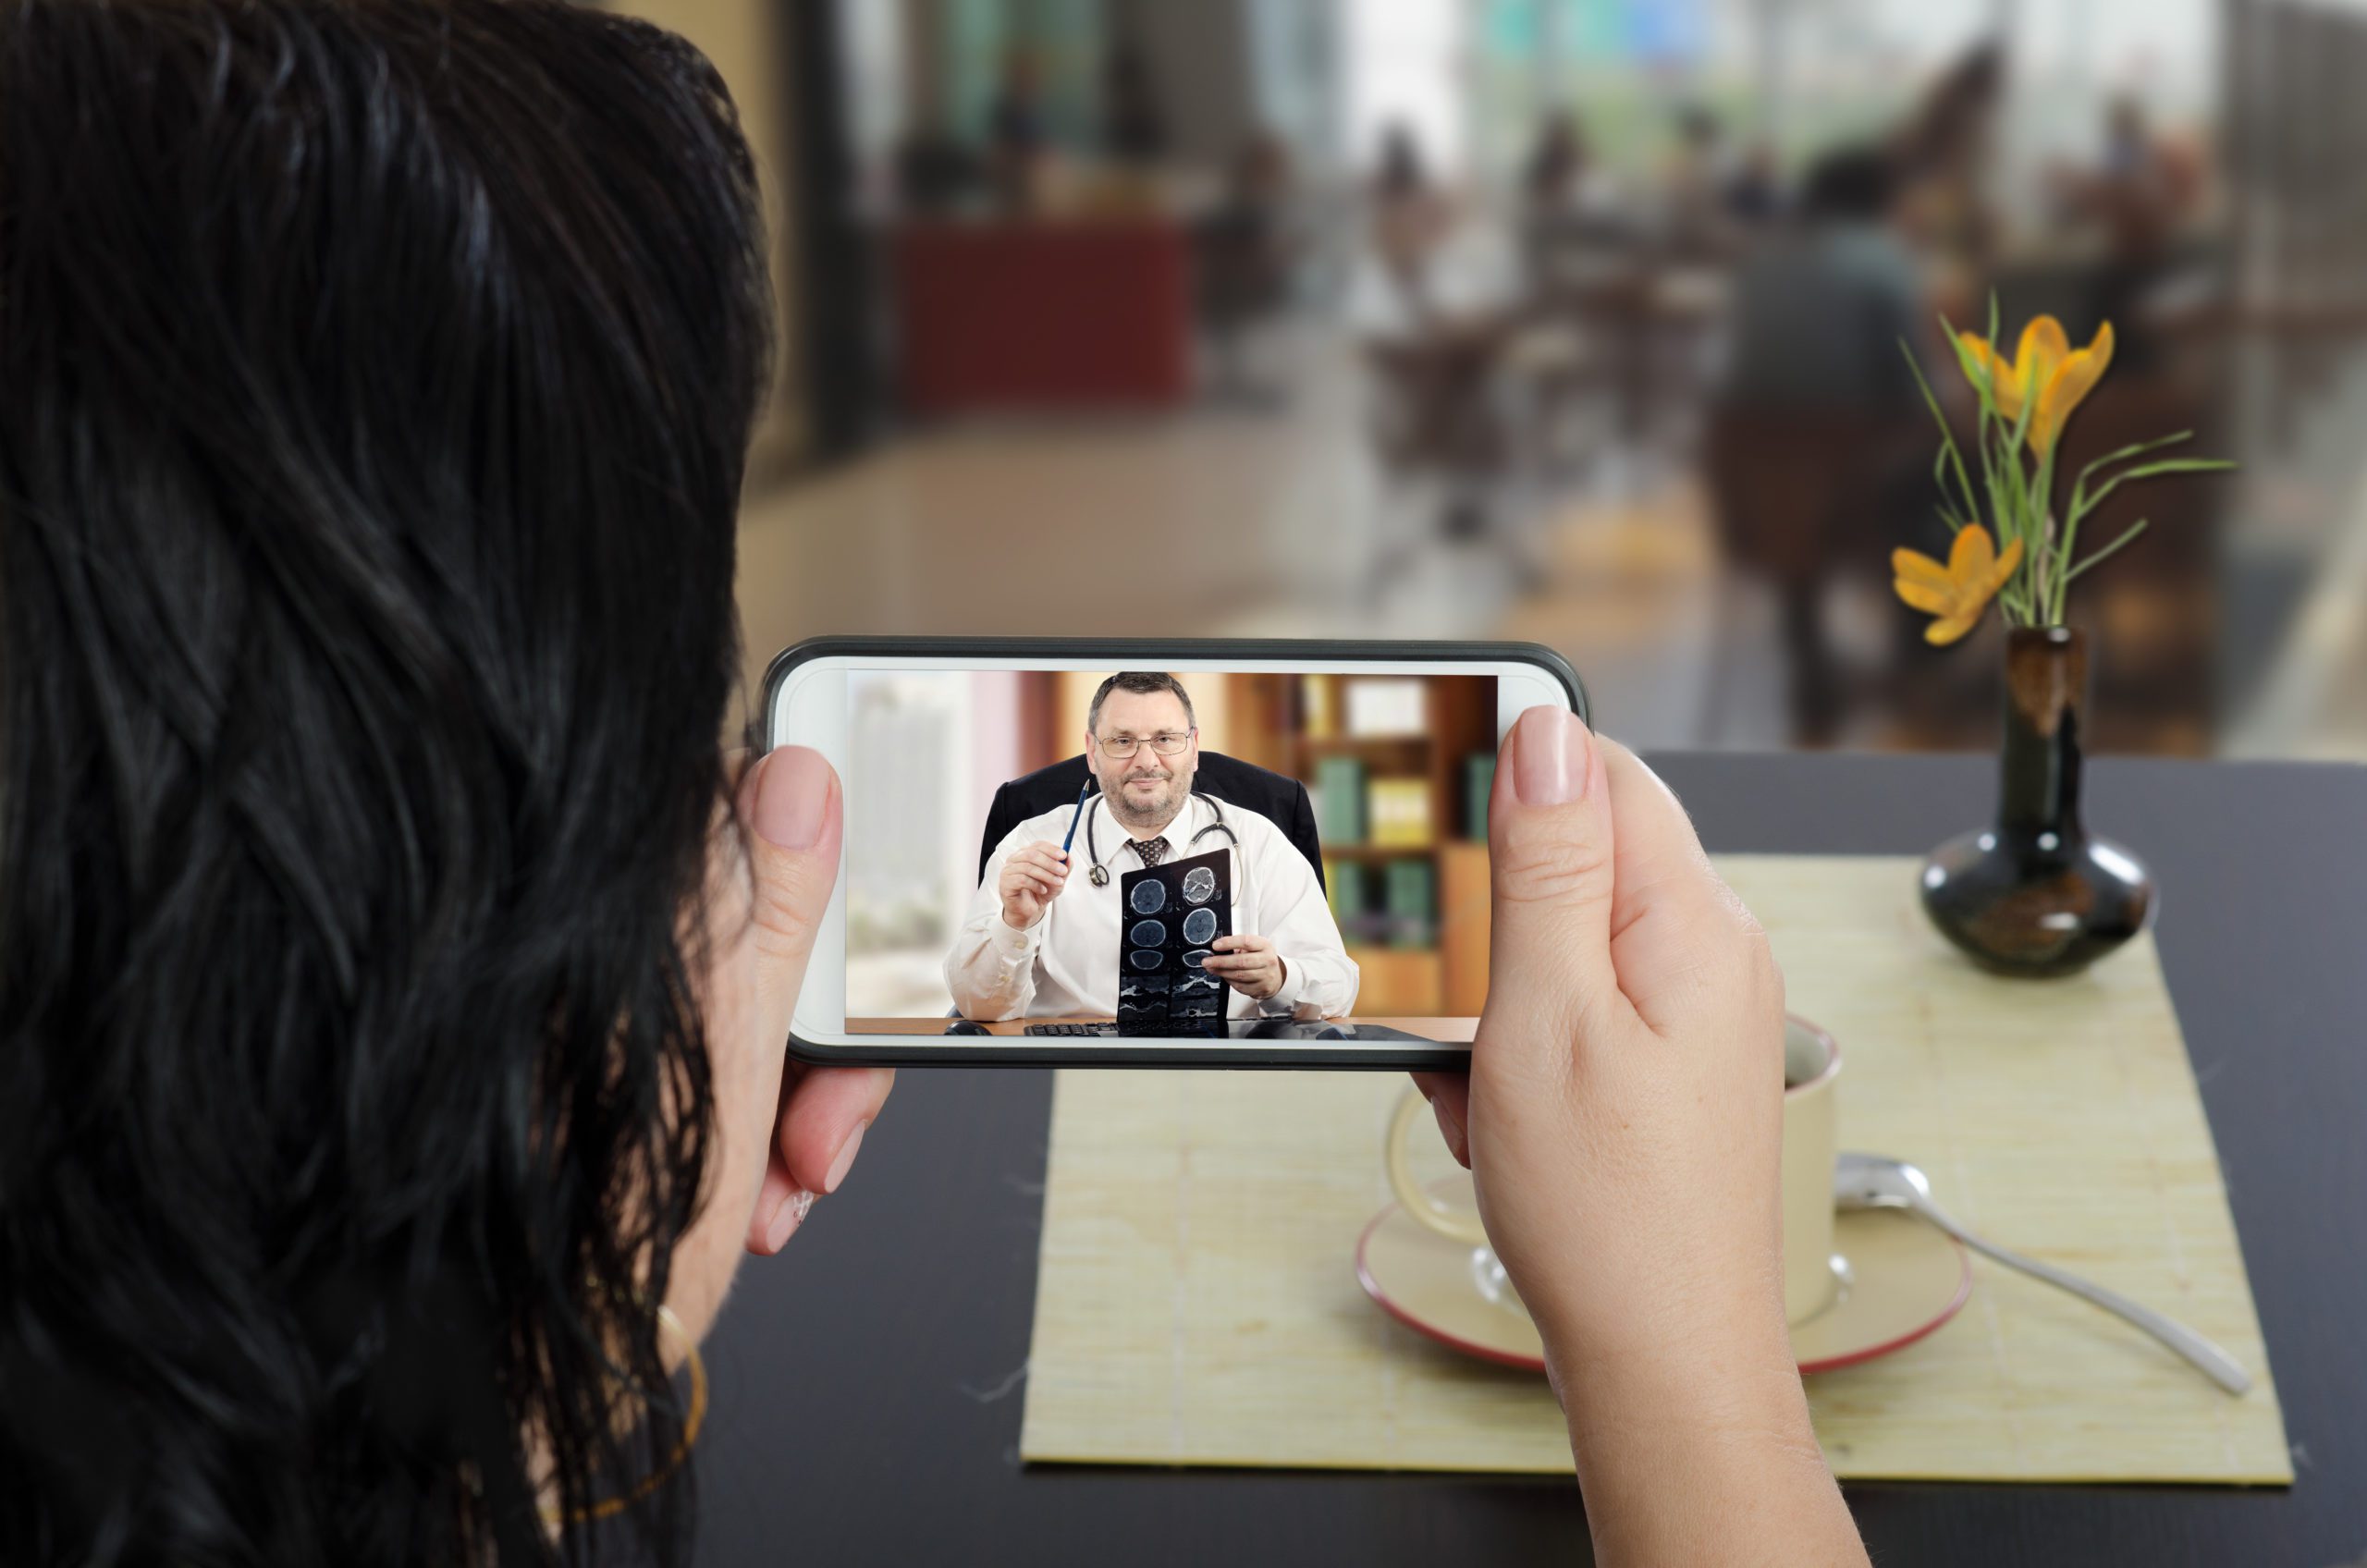 Image of a woman in a restaurant holding a phone during virtual consultation.